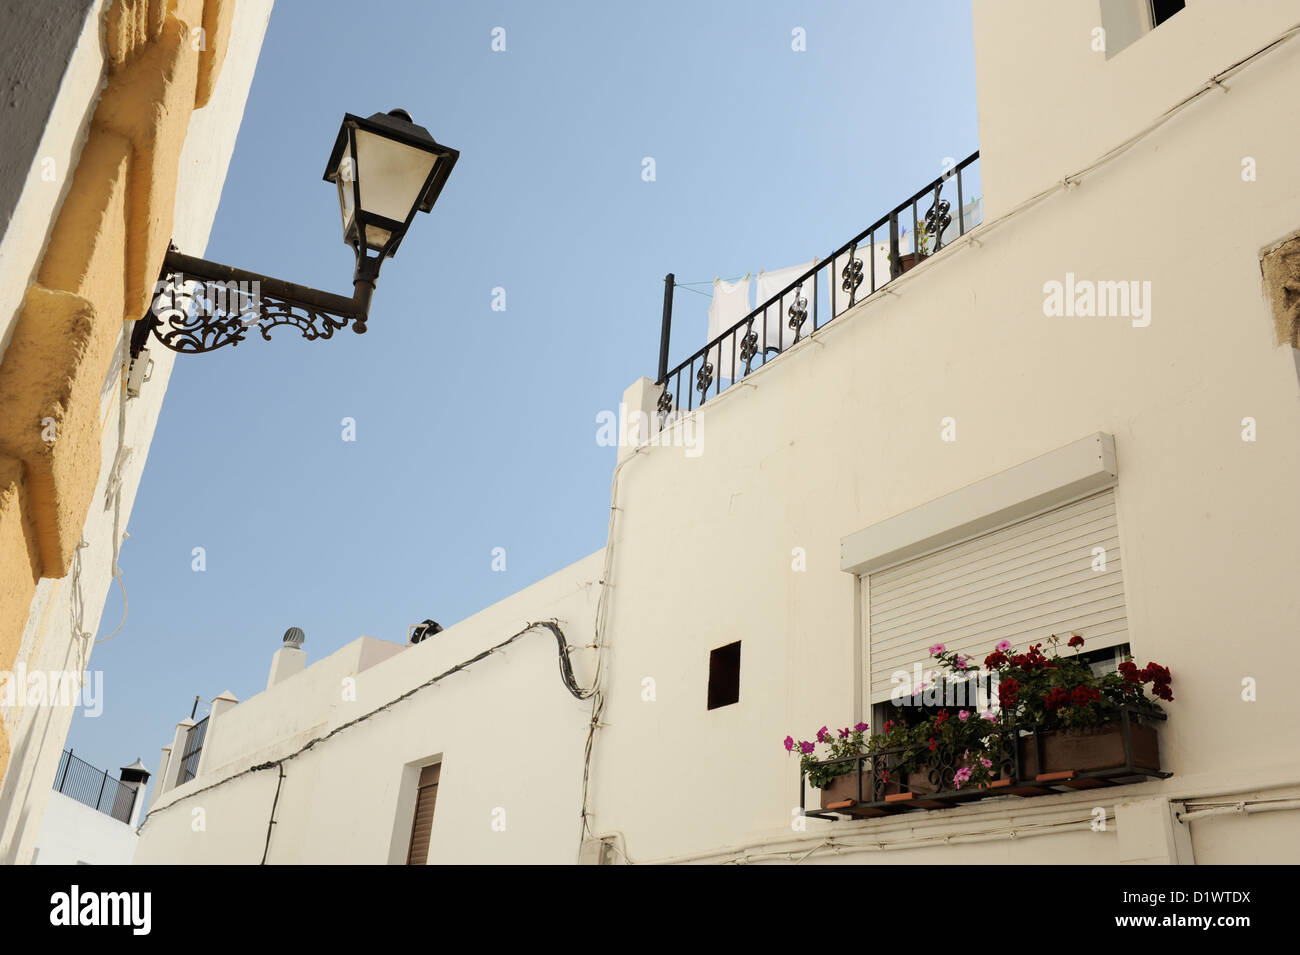 Vejer de la Frontera, one of the Pueblos Blancos or White Towns of Andalusia, Spain Stock Photo